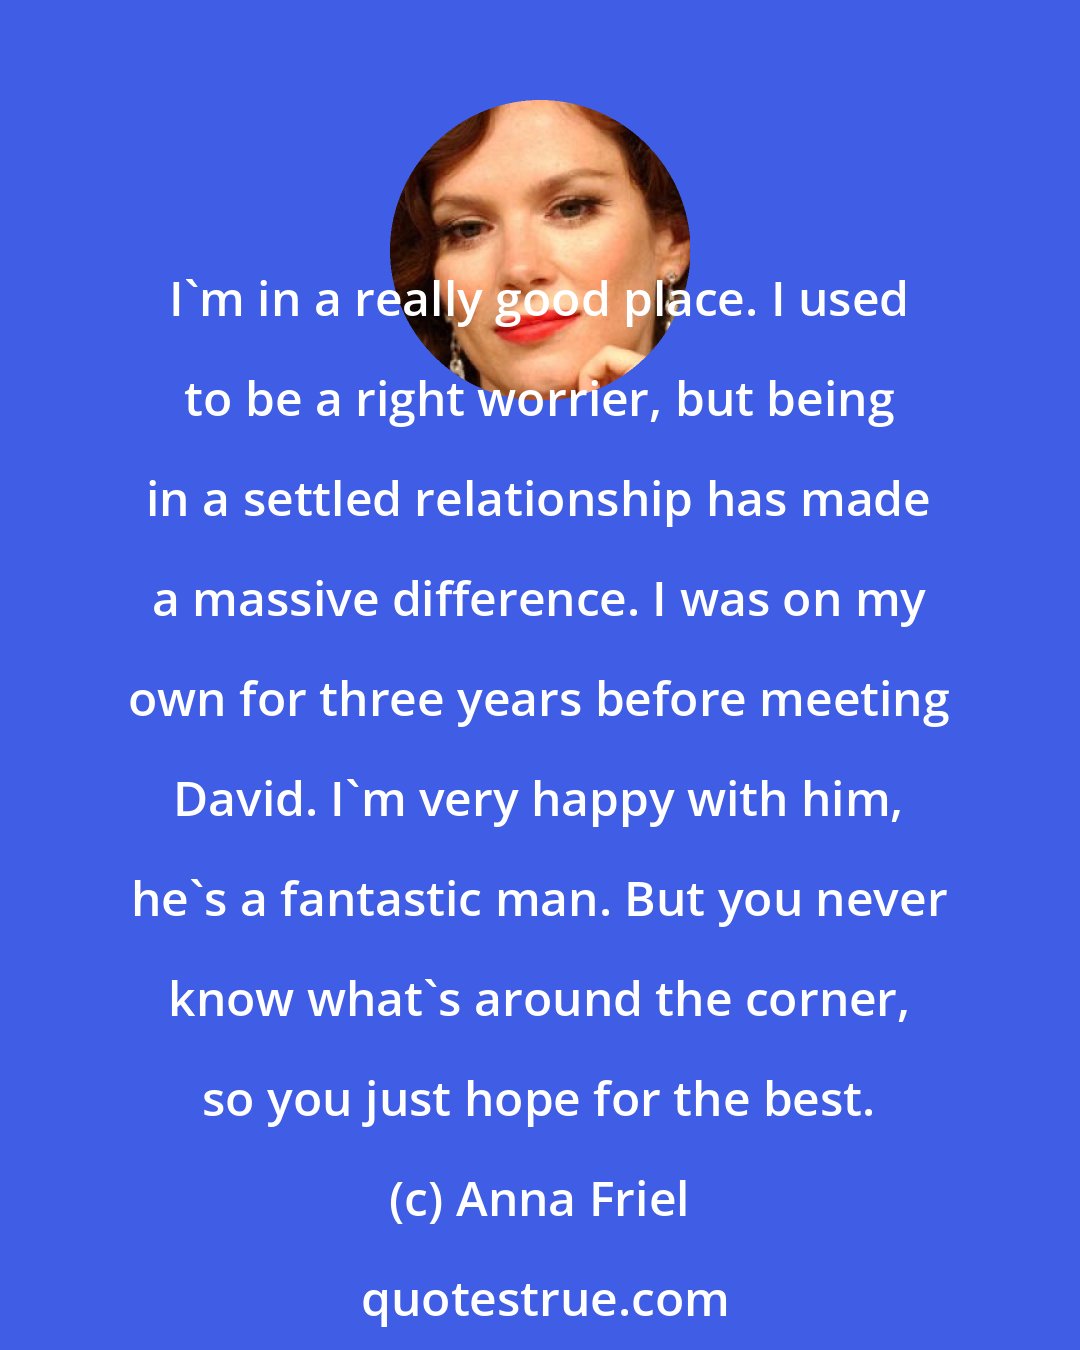 Anna Friel: I'm in a really good place. I used to be a right worrier, but being in a settled relationship has made a massive difference. I was on my own for three years before meeting David. I'm very happy with him, he's a fantastic man. But you never know what's around the corner, so you just hope for the best.